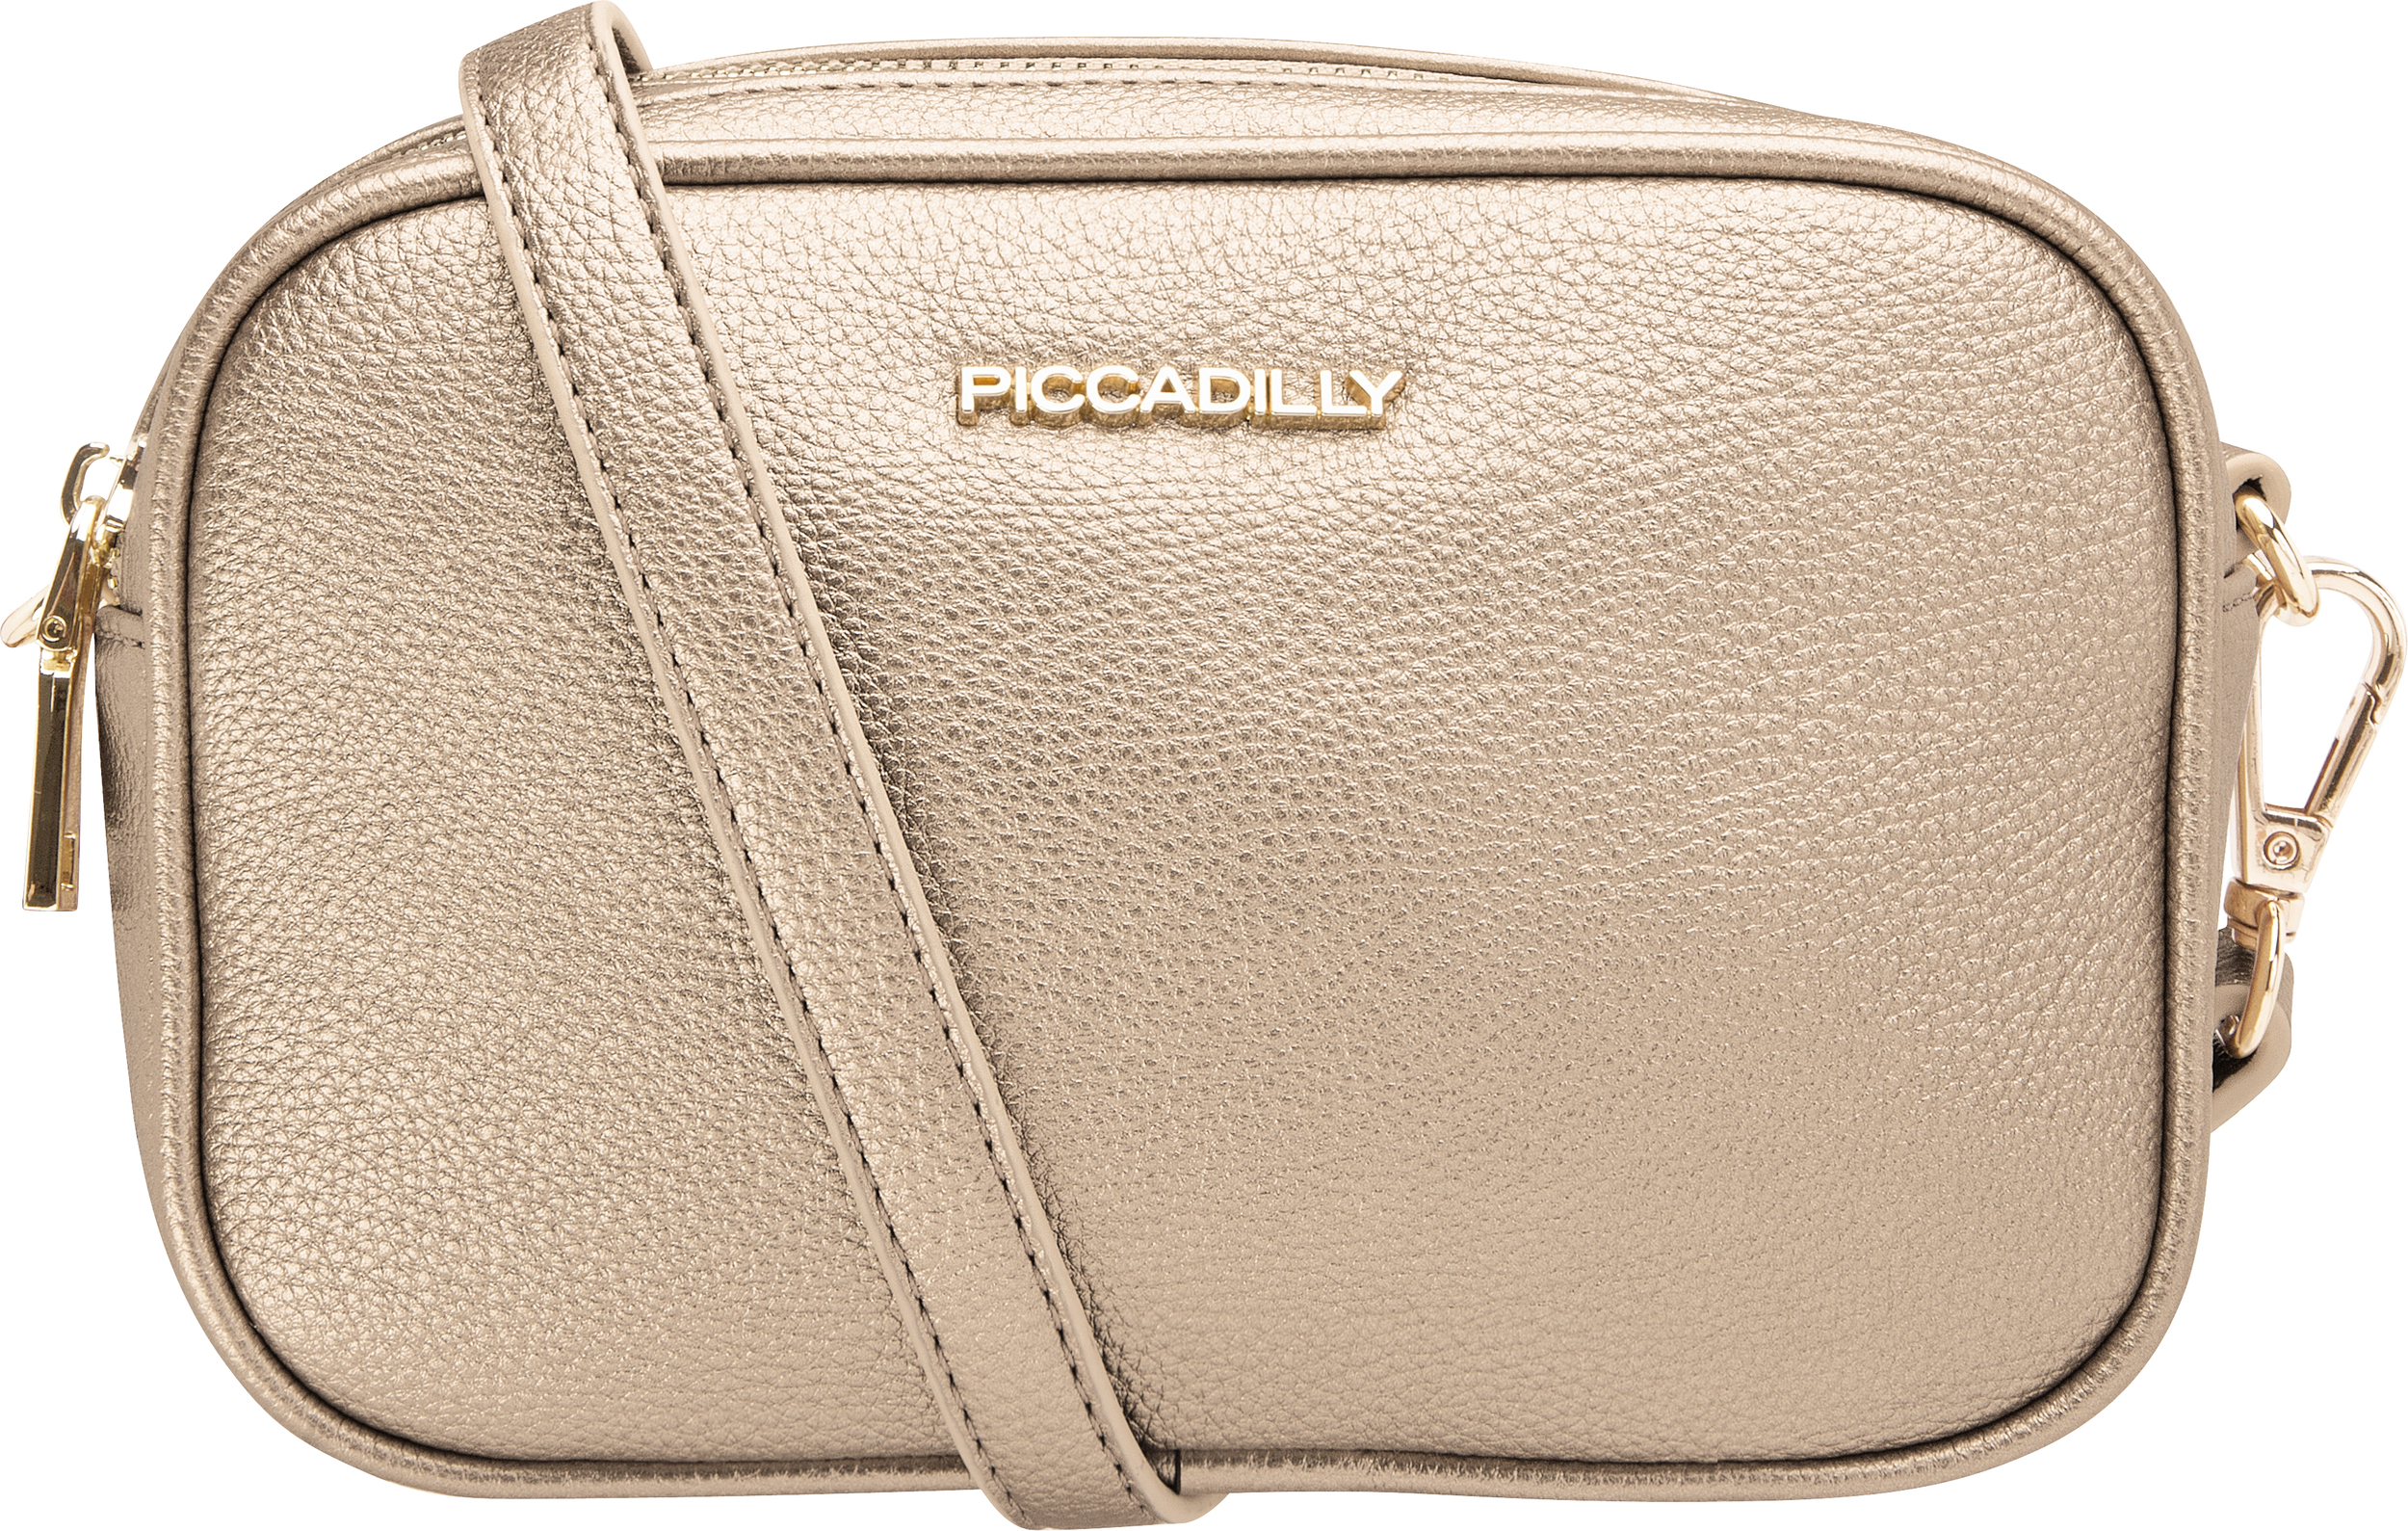 Sac en bandouliere dore Piccadilly